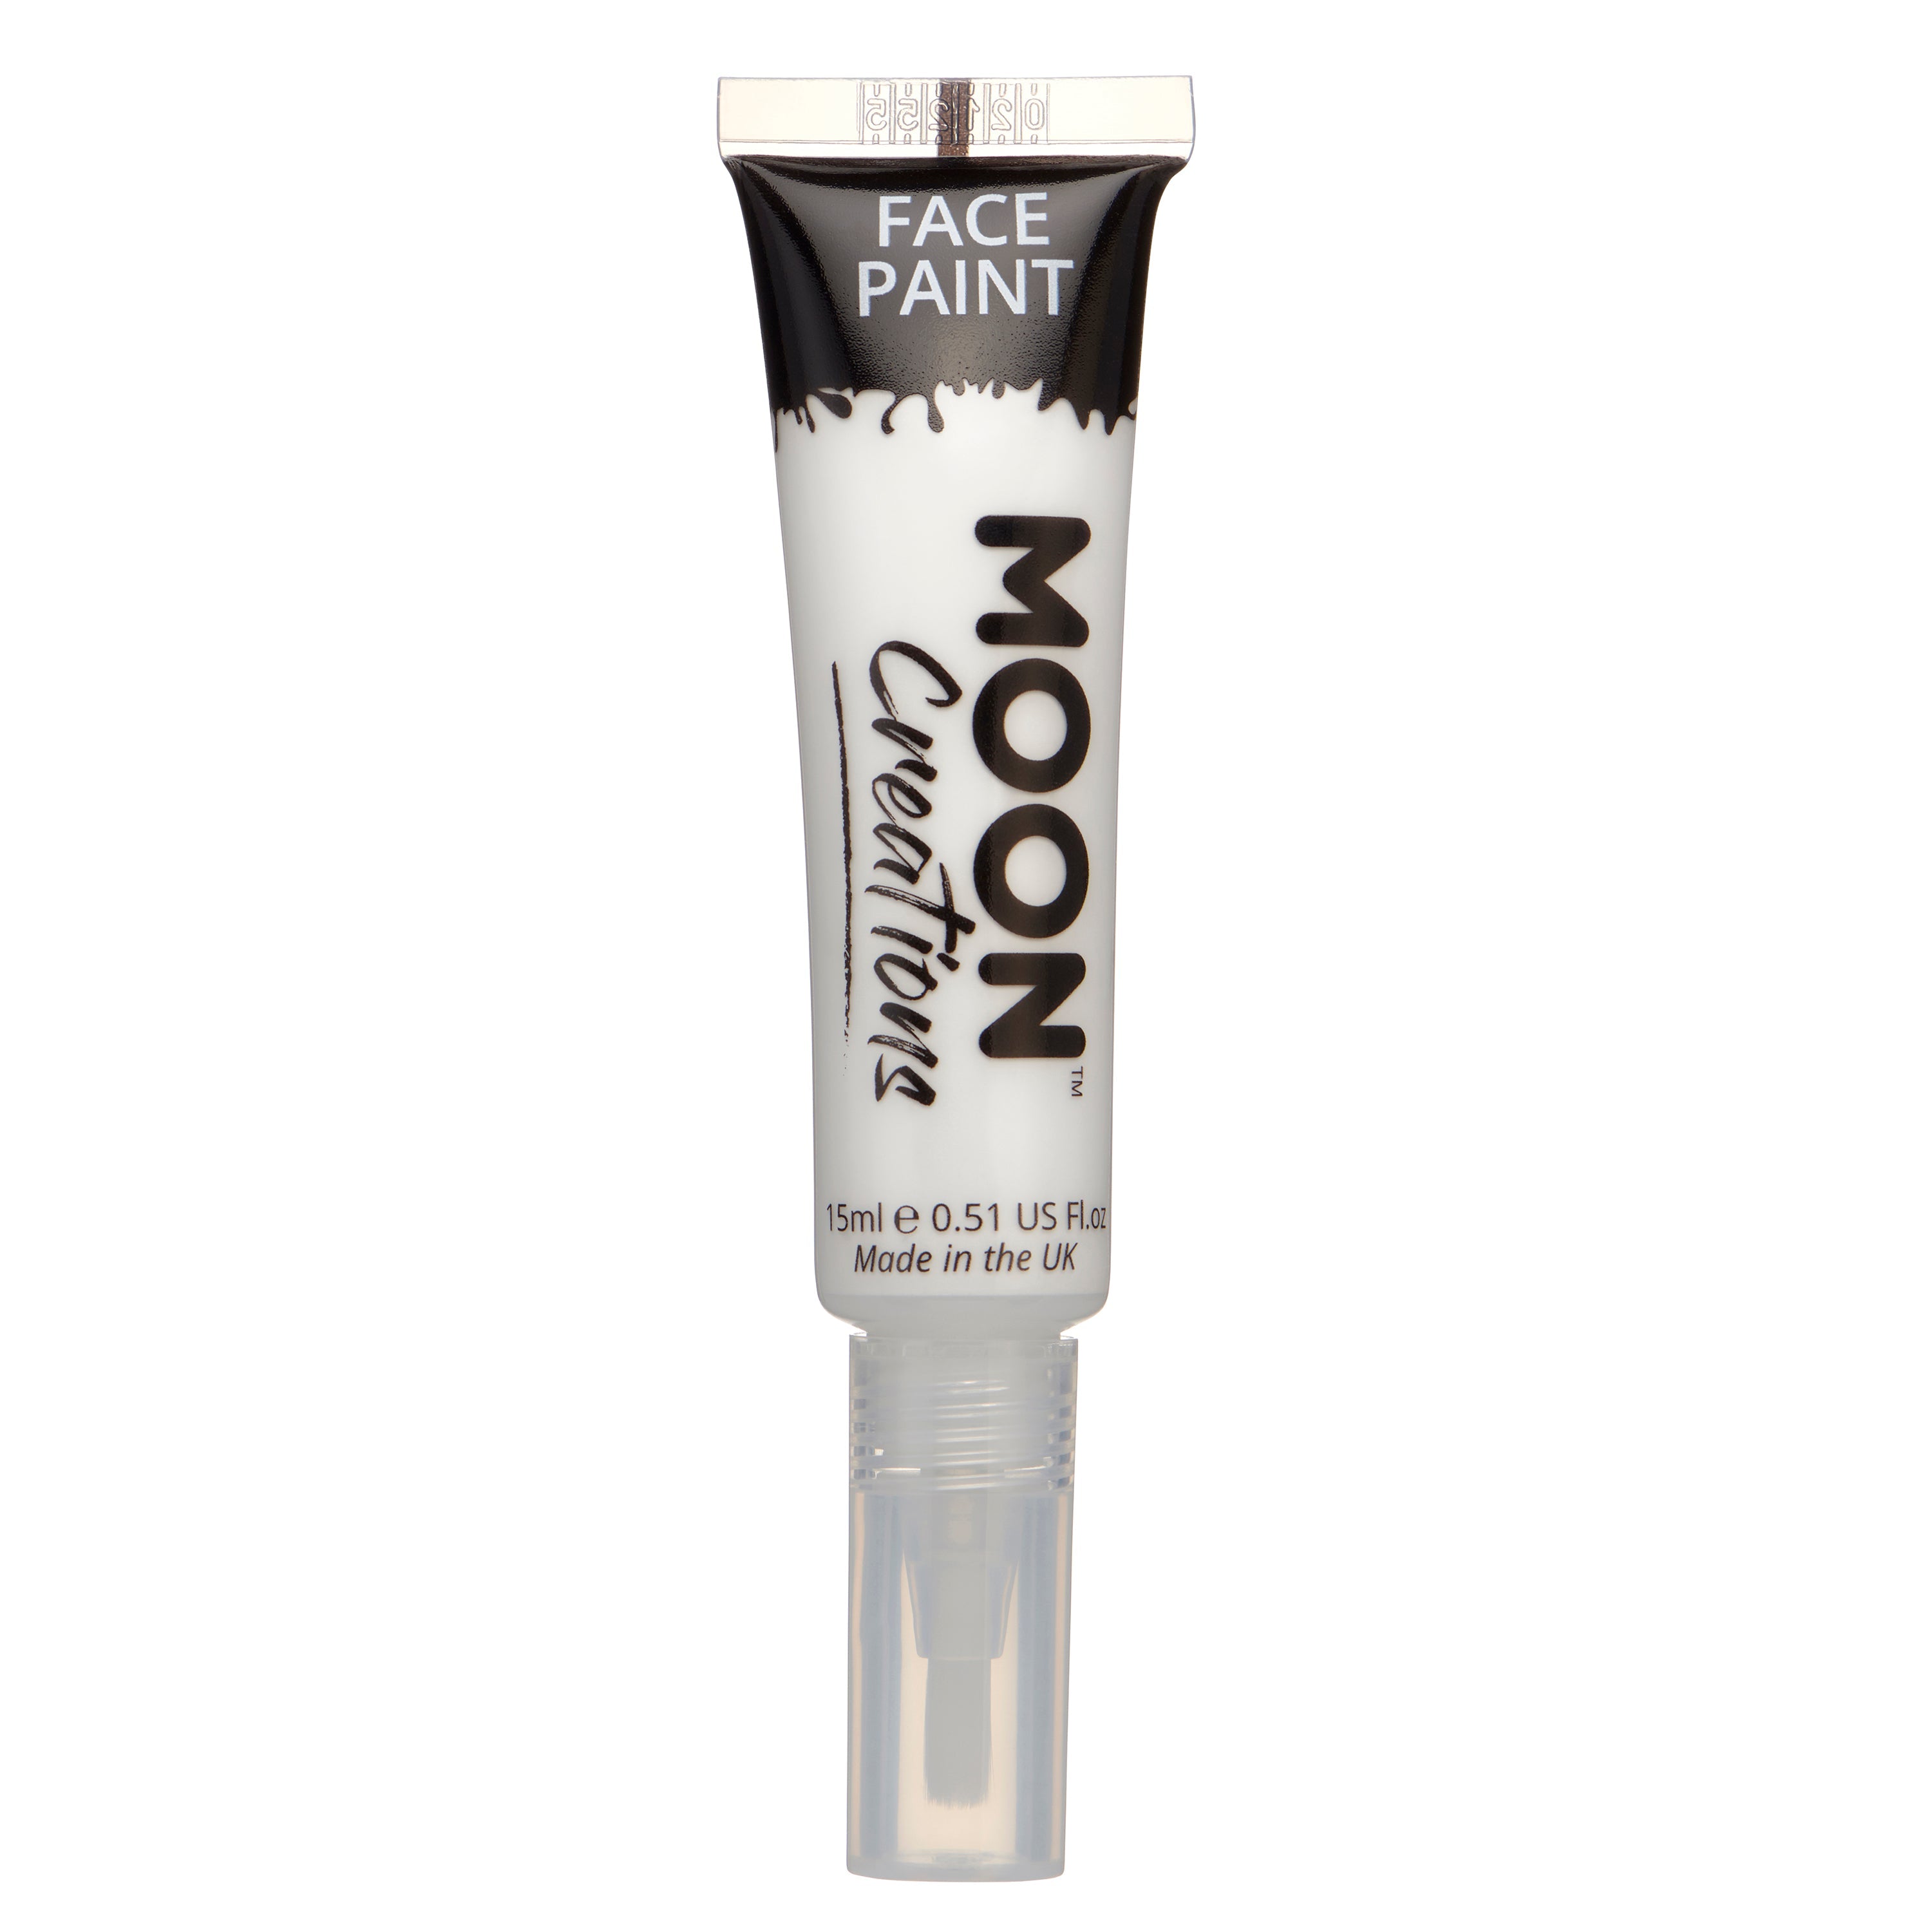 White - Face & Body Paint Makeup w/brush, 15mL. Cosmetically certified, FDA & Health Canada compliant, cruelty free and vegan.